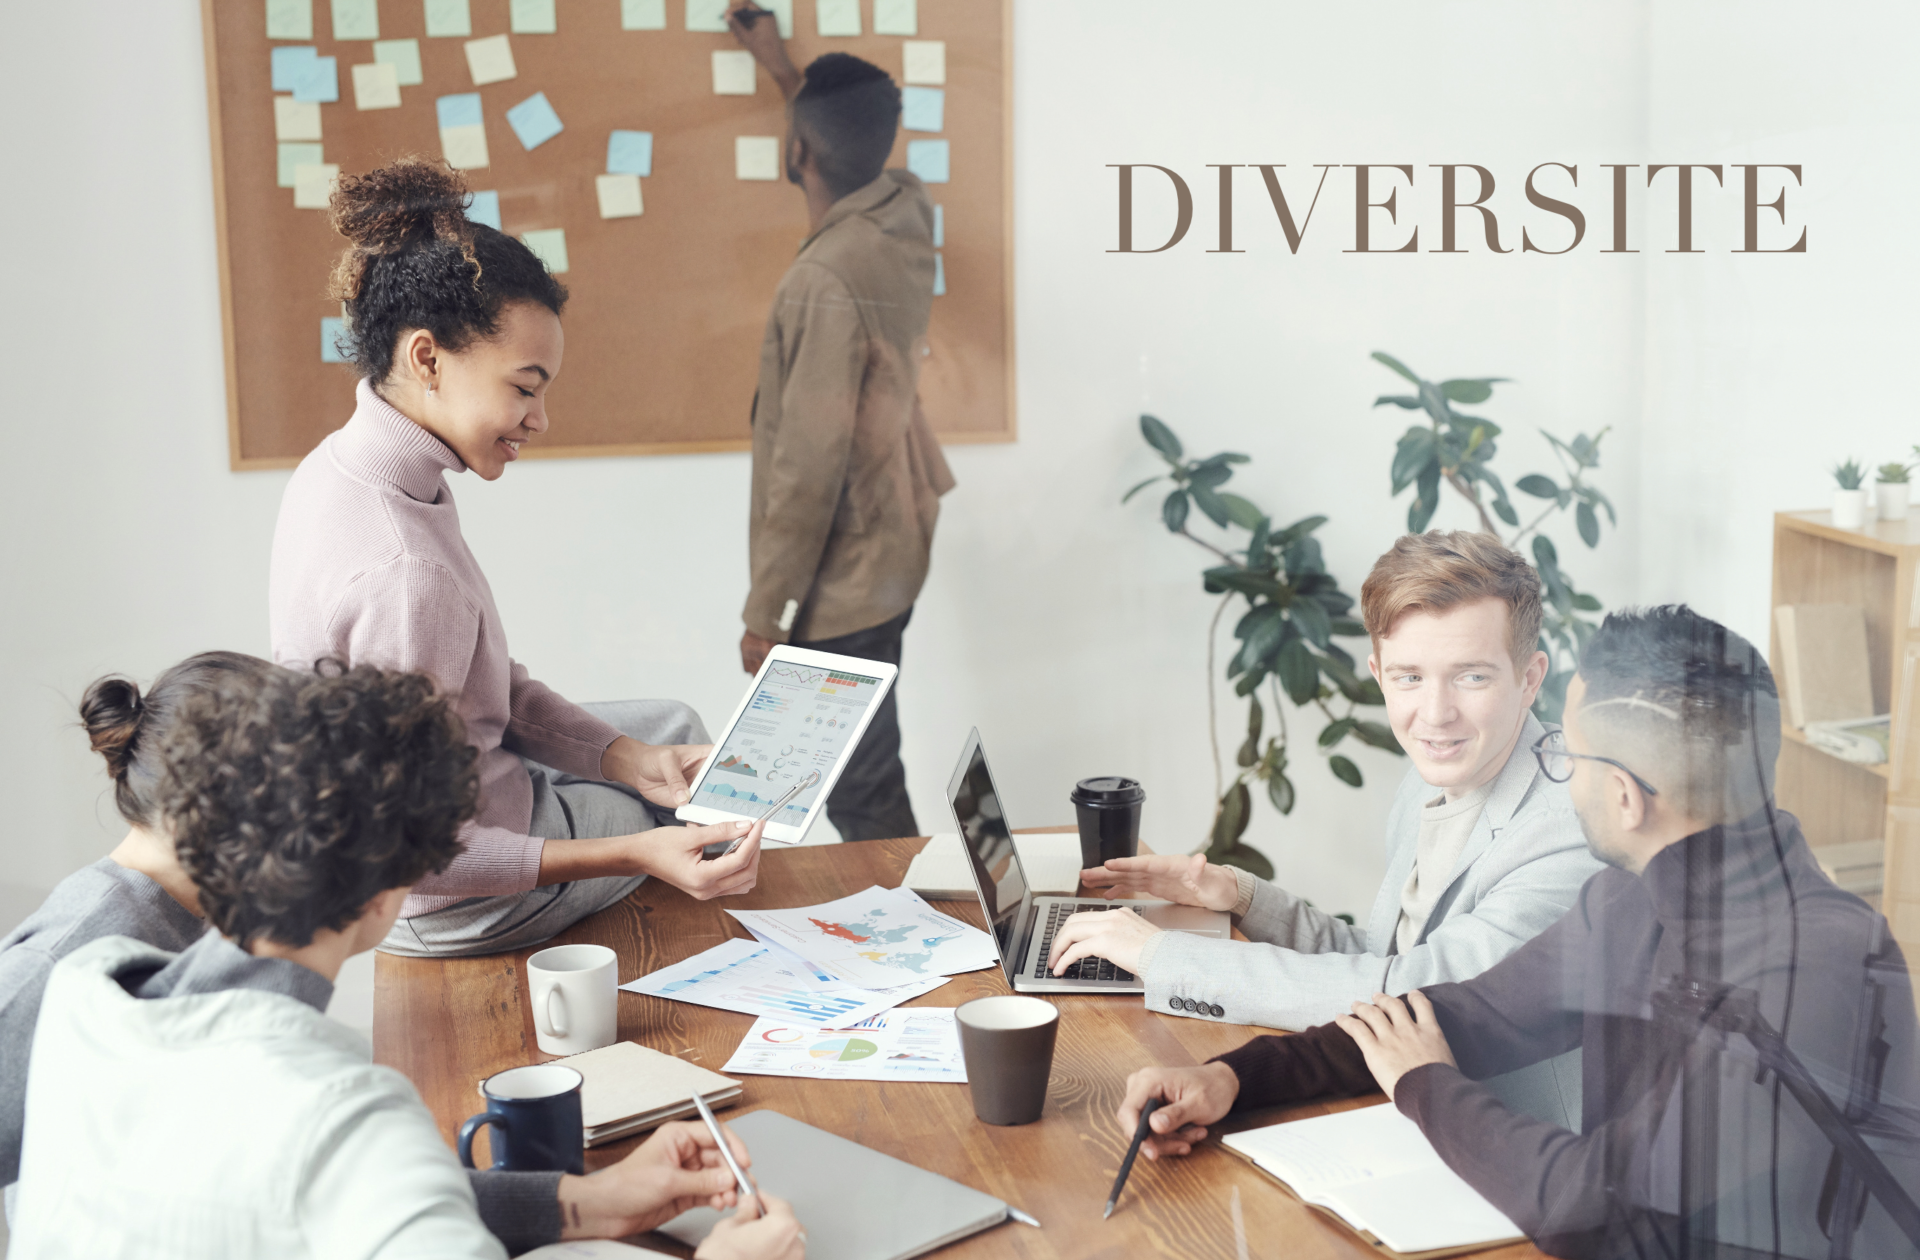 Diversity and inclusion